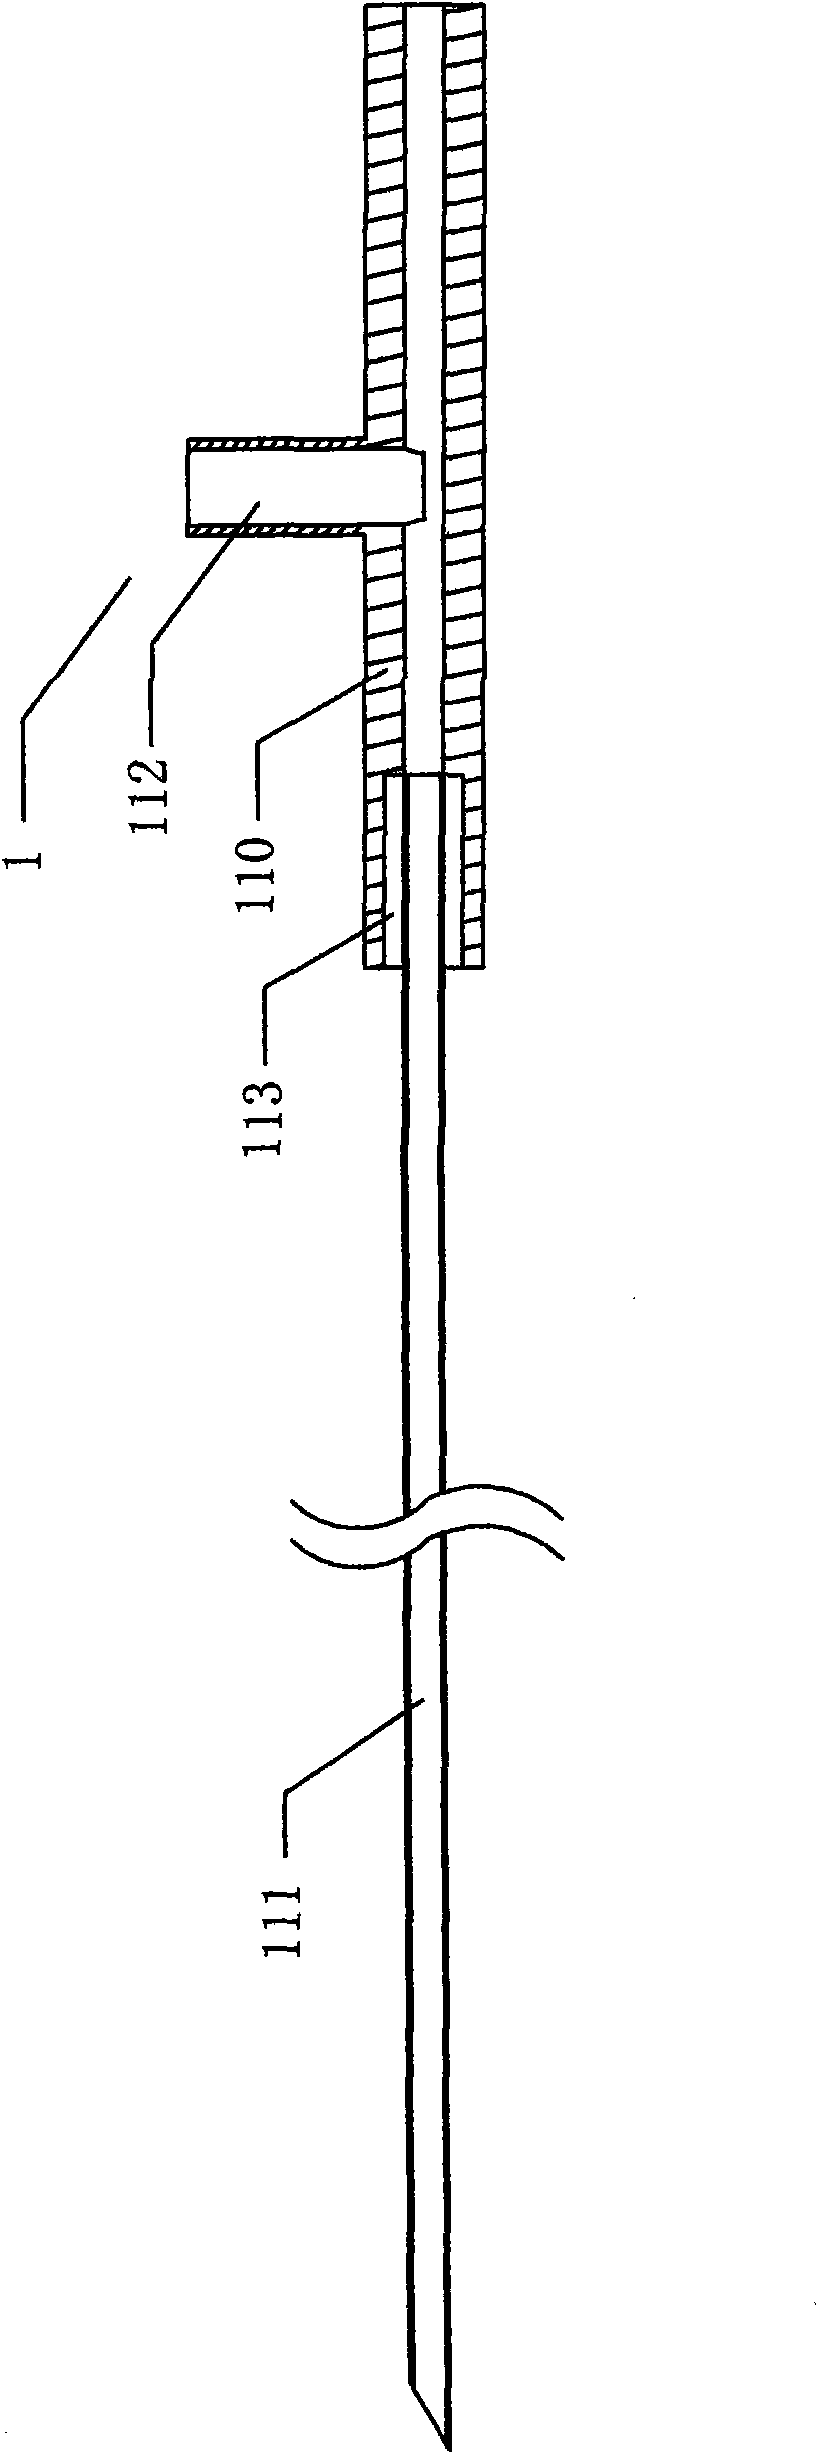 Water injected microwave antenna